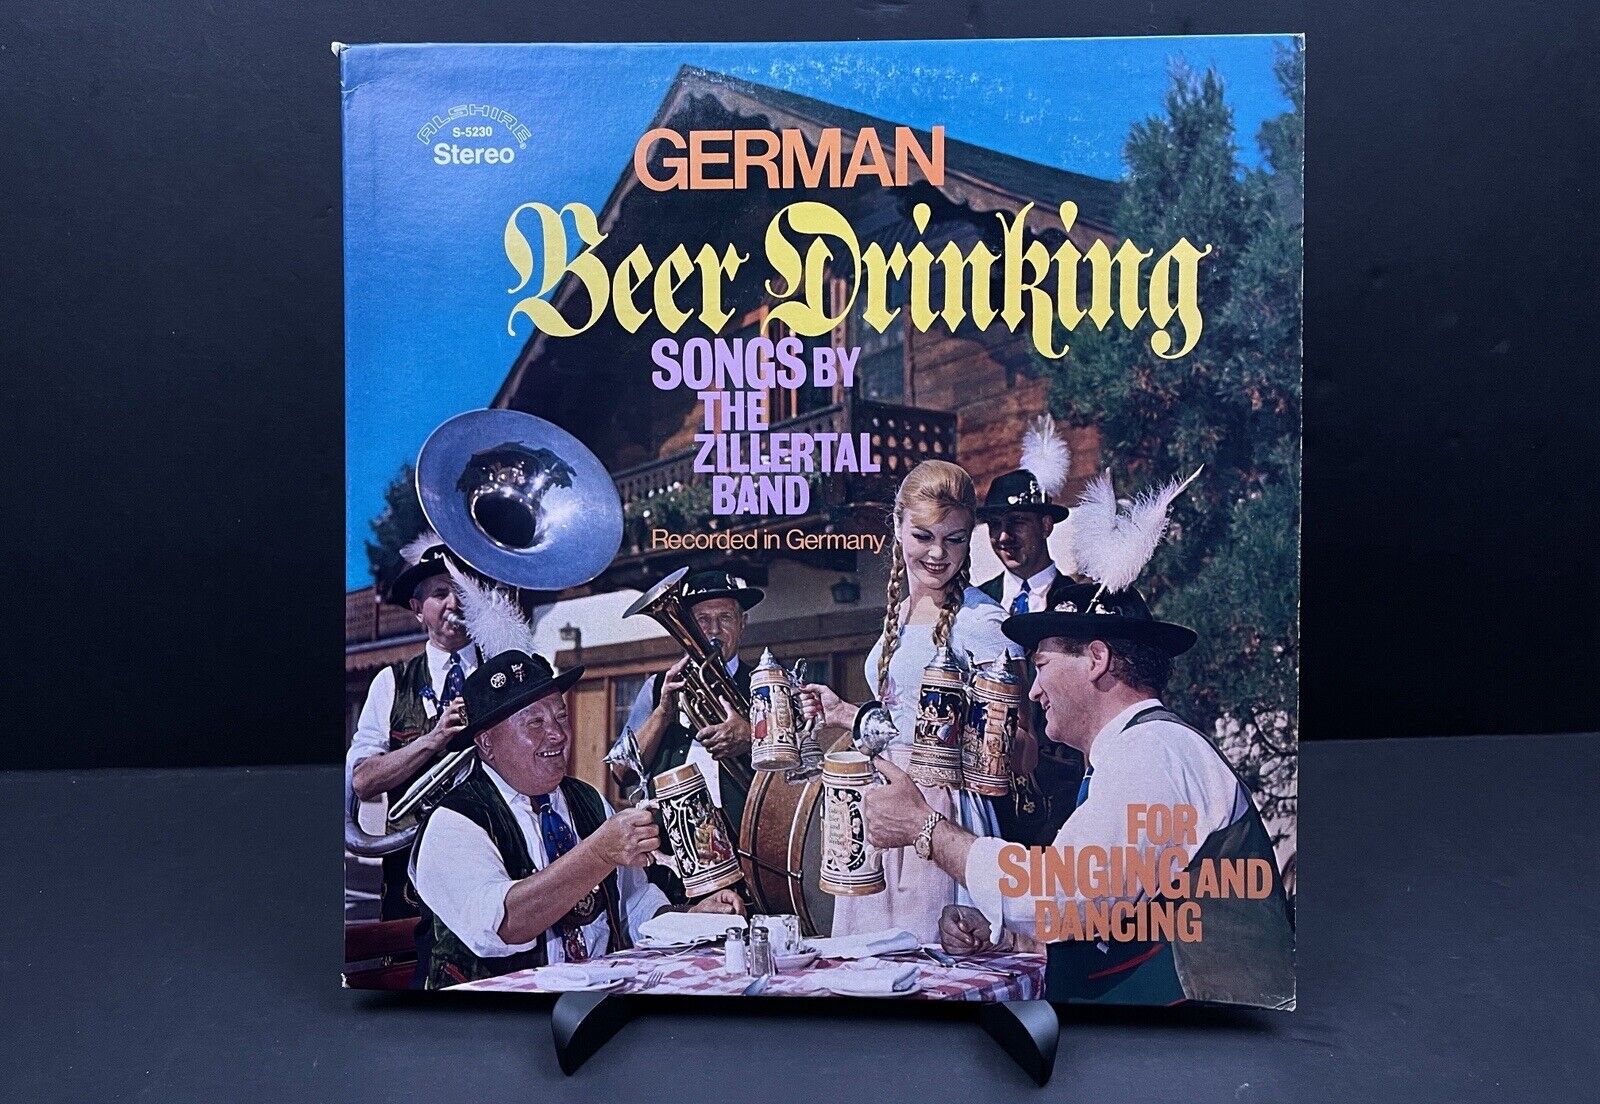 German Beer Drinking Songs By The Zillertal Band LP Vinyl Record Alshire VG+